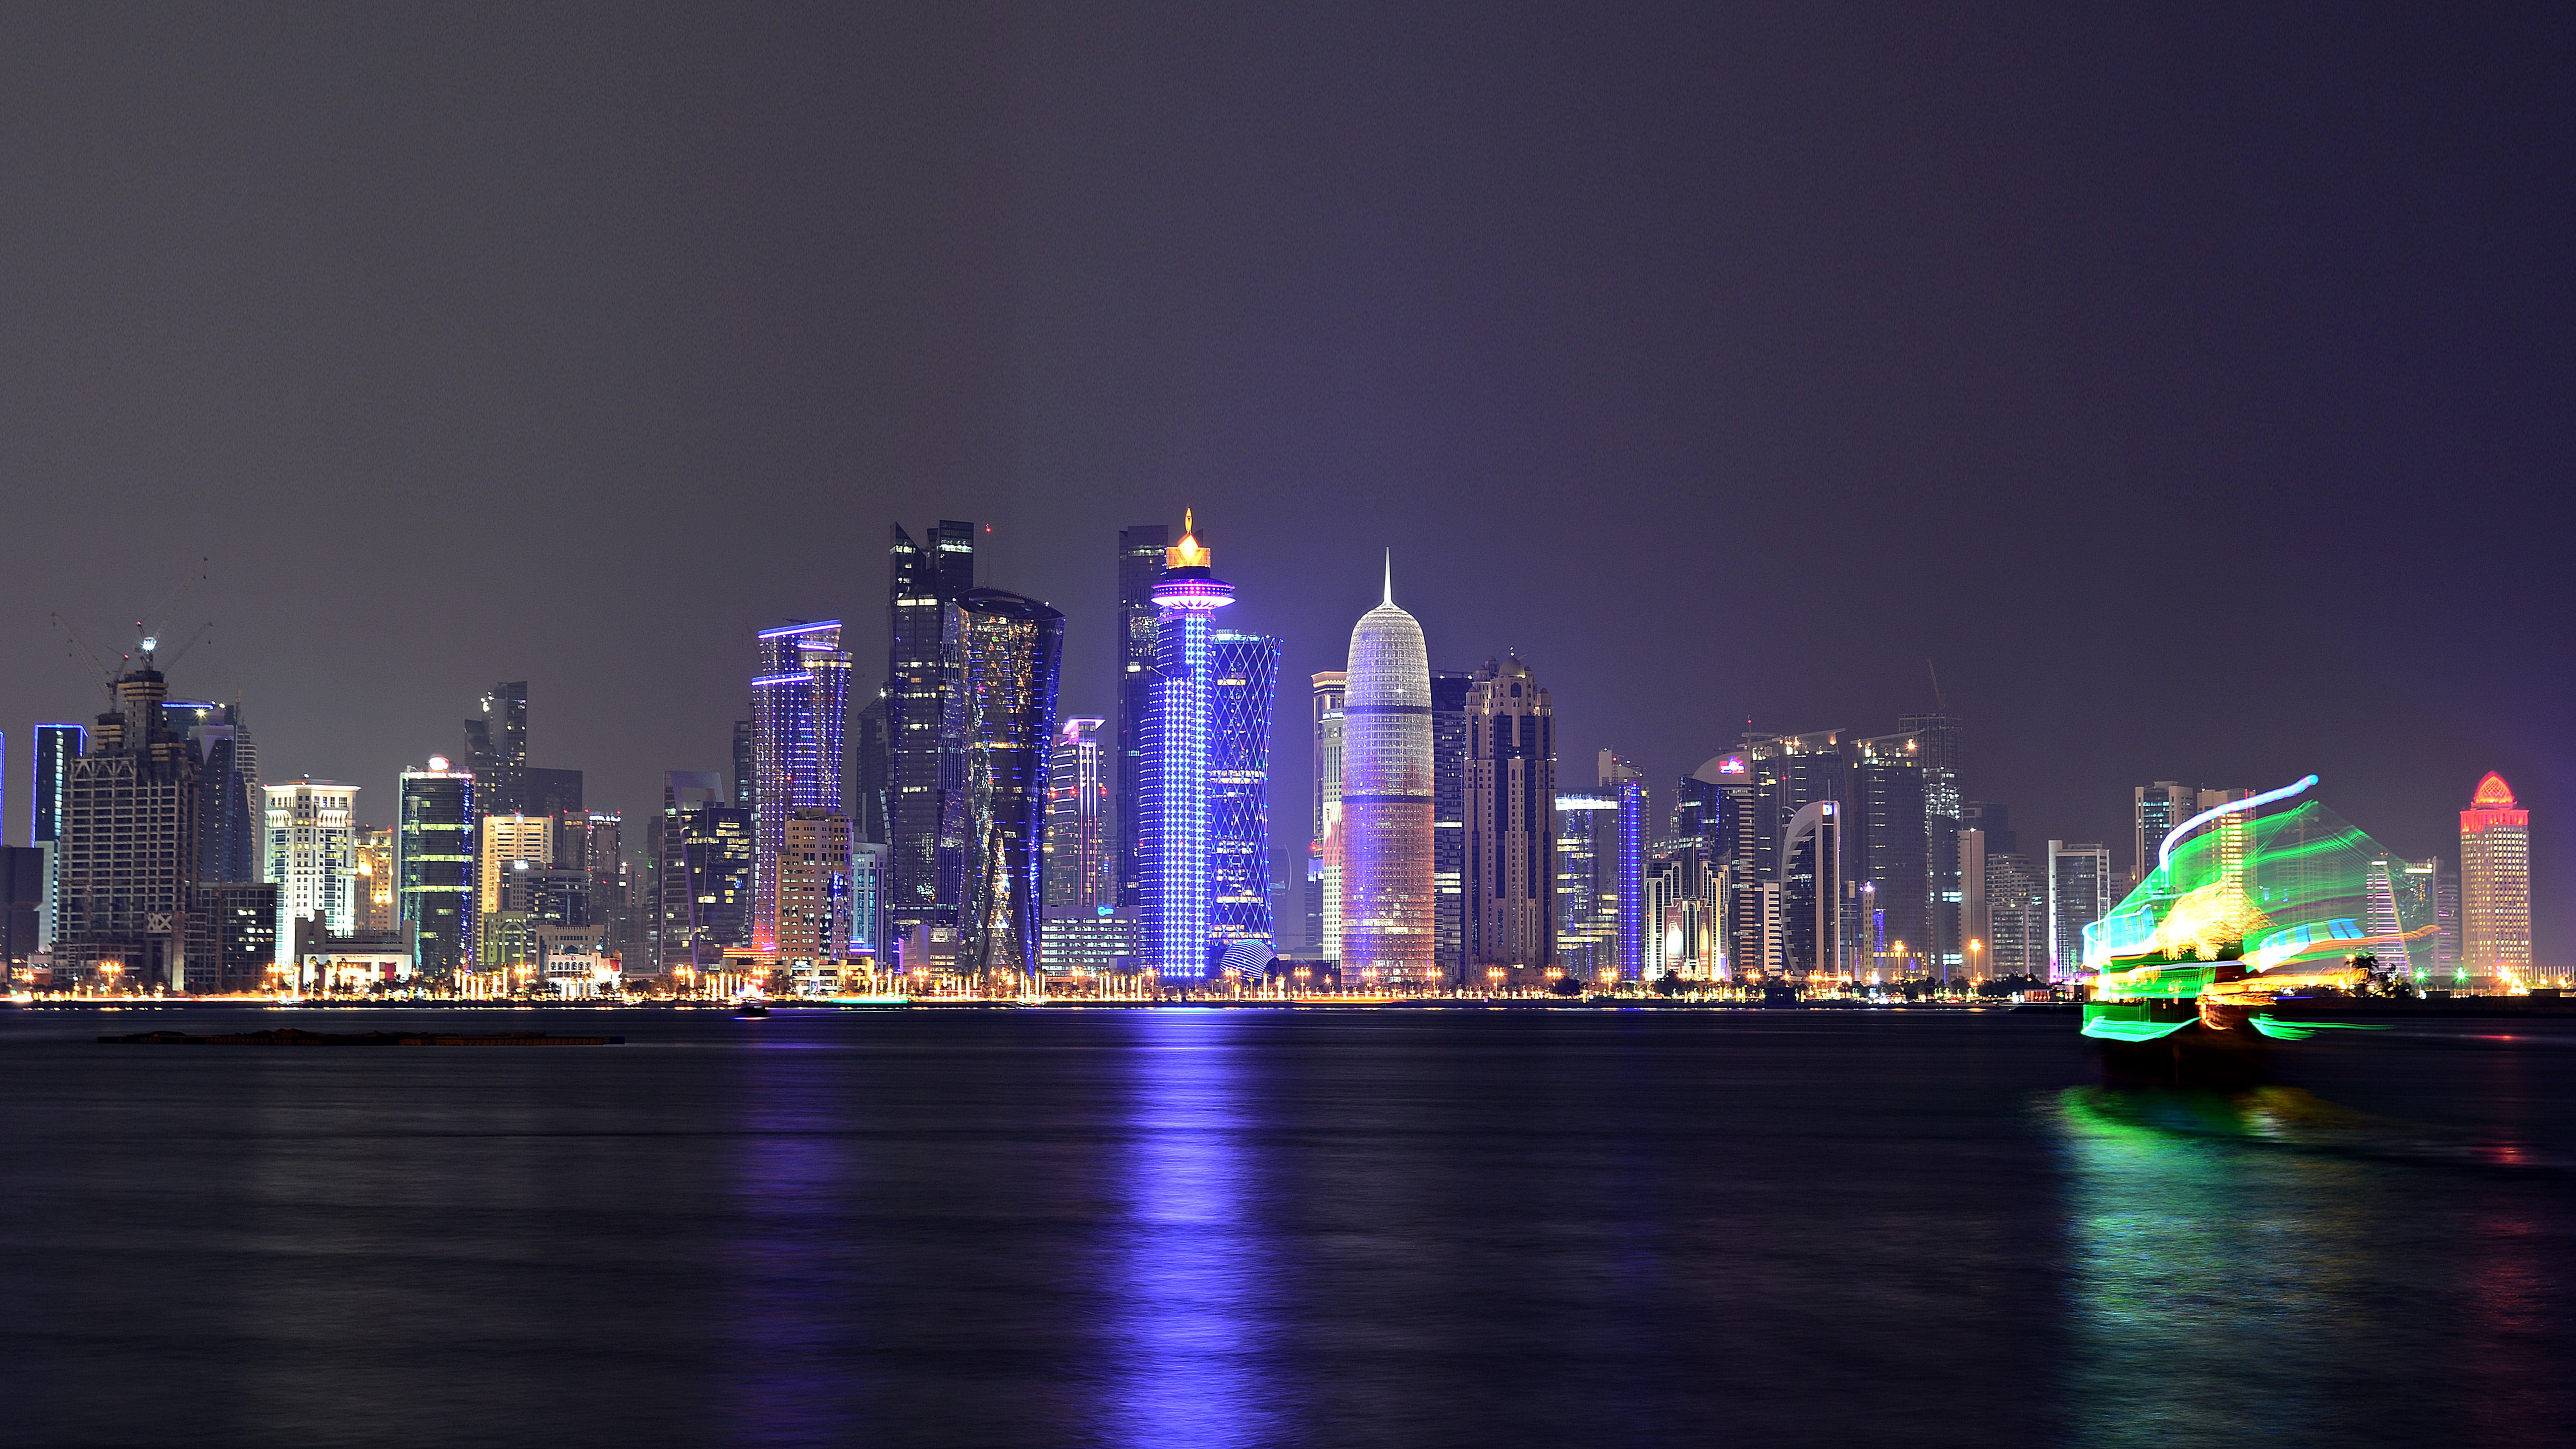 Qatar Dhows Towers Doha Bay Corniche Hd Desktop Wallpapers For Computers Laptop Tablet And Mobile Phones 5200×2925